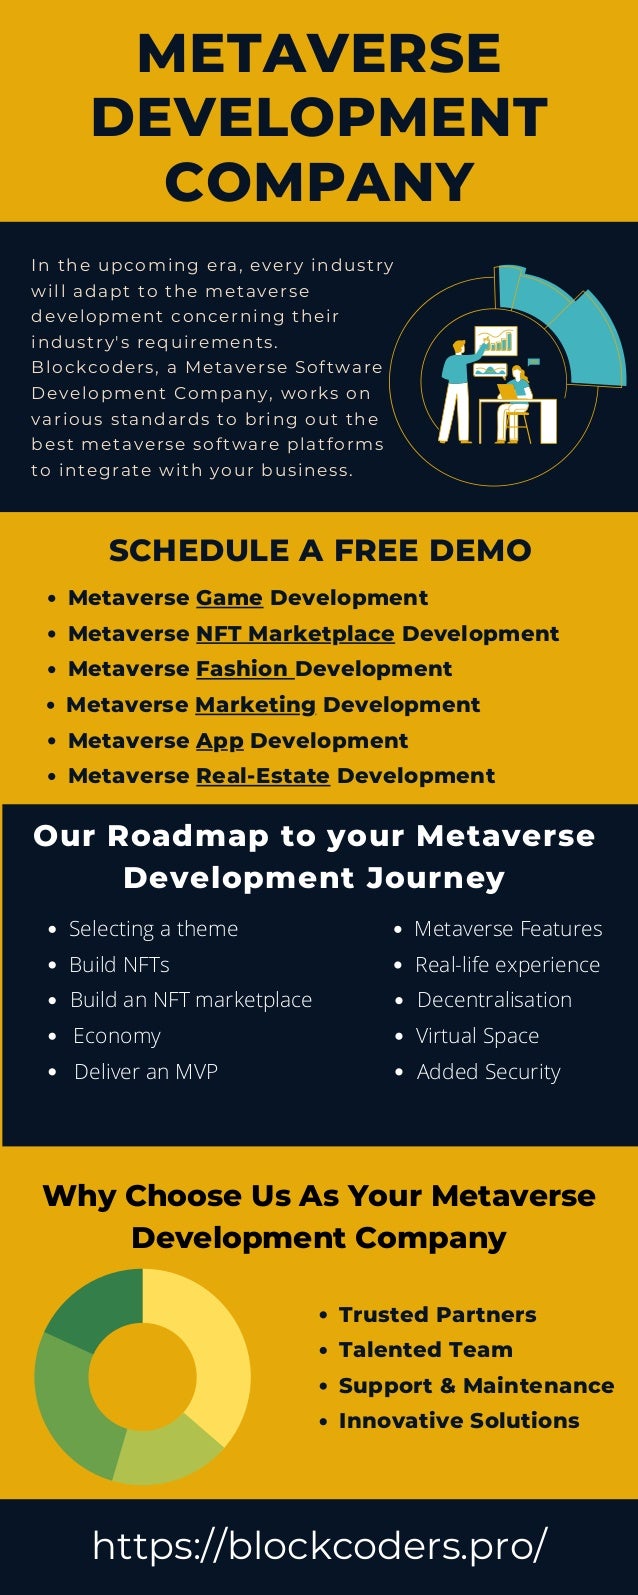 In the upcoming era, every industry
will adapt to the metaverse
development concerning their
industry's requirements.
Blockcoders, a Metaverse Software
Development Company, works on
various standards to bring out the
best metaverse software platforms
to integrate with your business.
Metaverse Game Development
Trusted Partners
METAVERSE
DEVELOPMENT
COMPANY
SCHEDULE A FREE DEMO
Metaverse NFT Marketplace Development
Metaverse Fashion Development
Metaverse Marketing Development
Metaverse App Development
Metaverse Real-Estate Development
Our Roadmap to your Metaverse
Development Journey
Selecting a theme
Build NFTs
Build an NFT marketplace
Economy
Deliver an MVP
Metaverse Features
Real-life experience
Decentralisation
Virtual Space
Added Security
Why Choose Us As Your Metaverse
Development Company
Talented Team
Support & Maintenance
Innovative Solutions
https://blockcoders.pro/
 